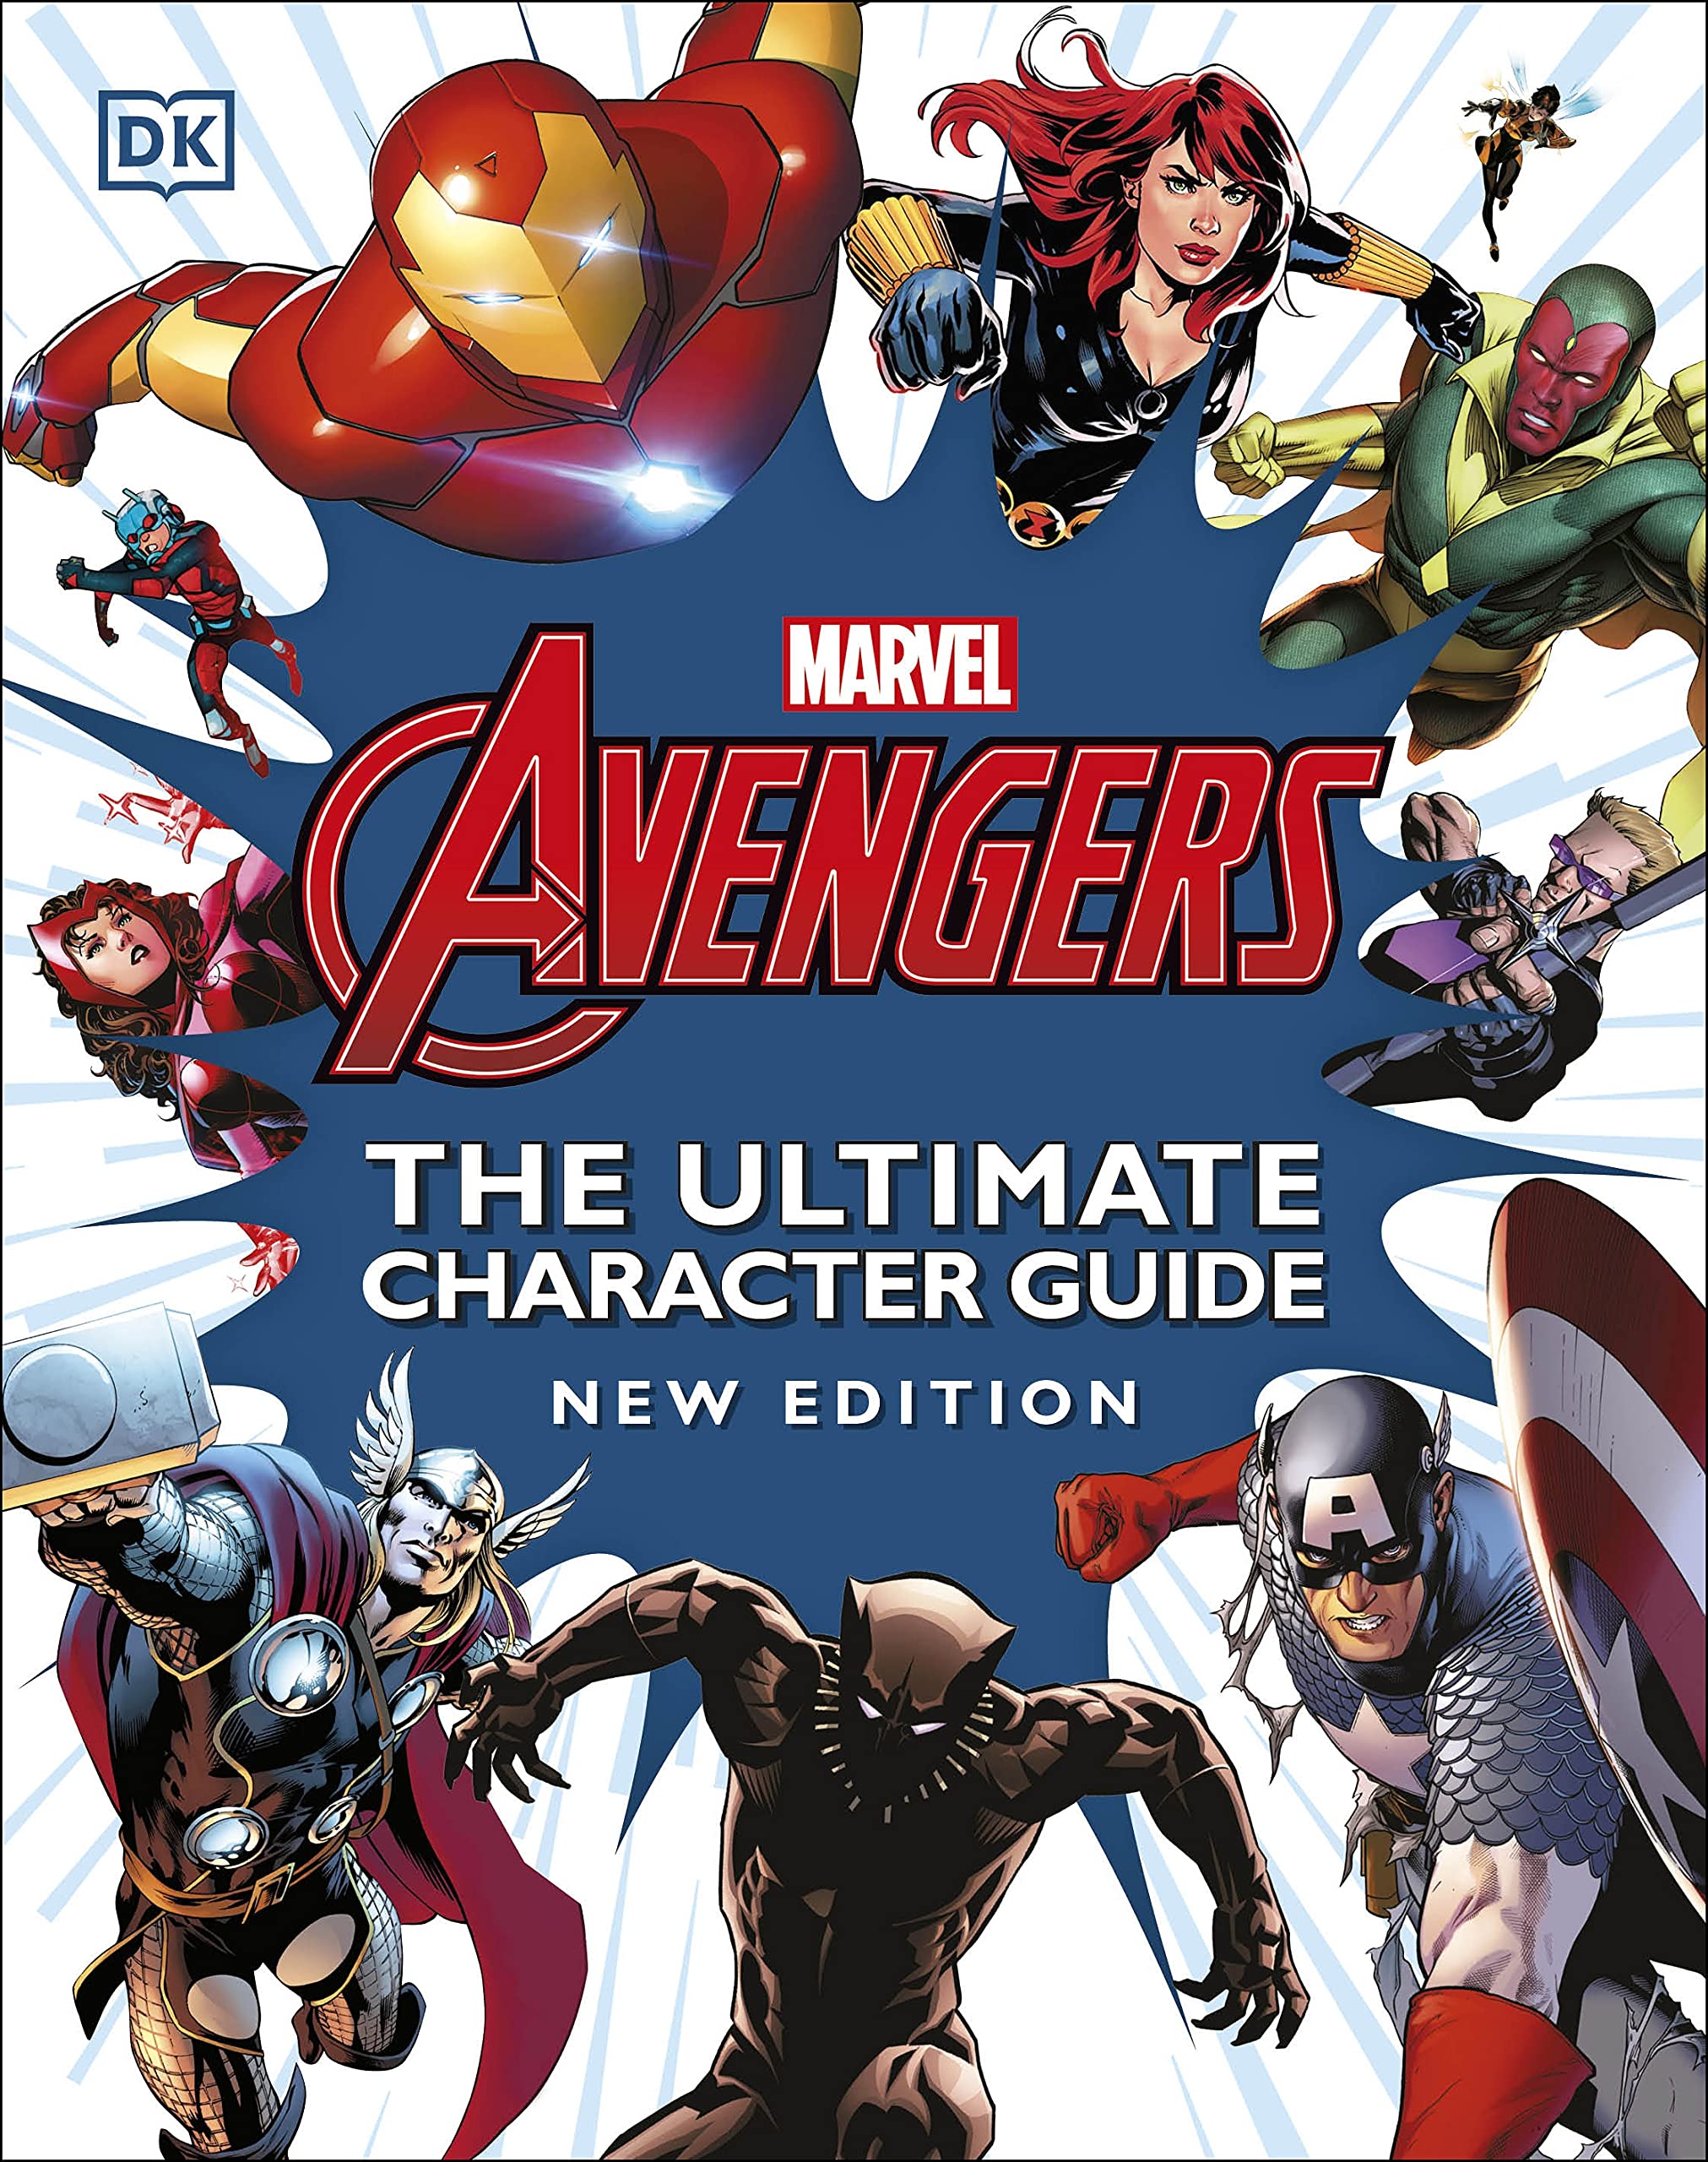 Marvel Avengers - The Ultimate Character Guide